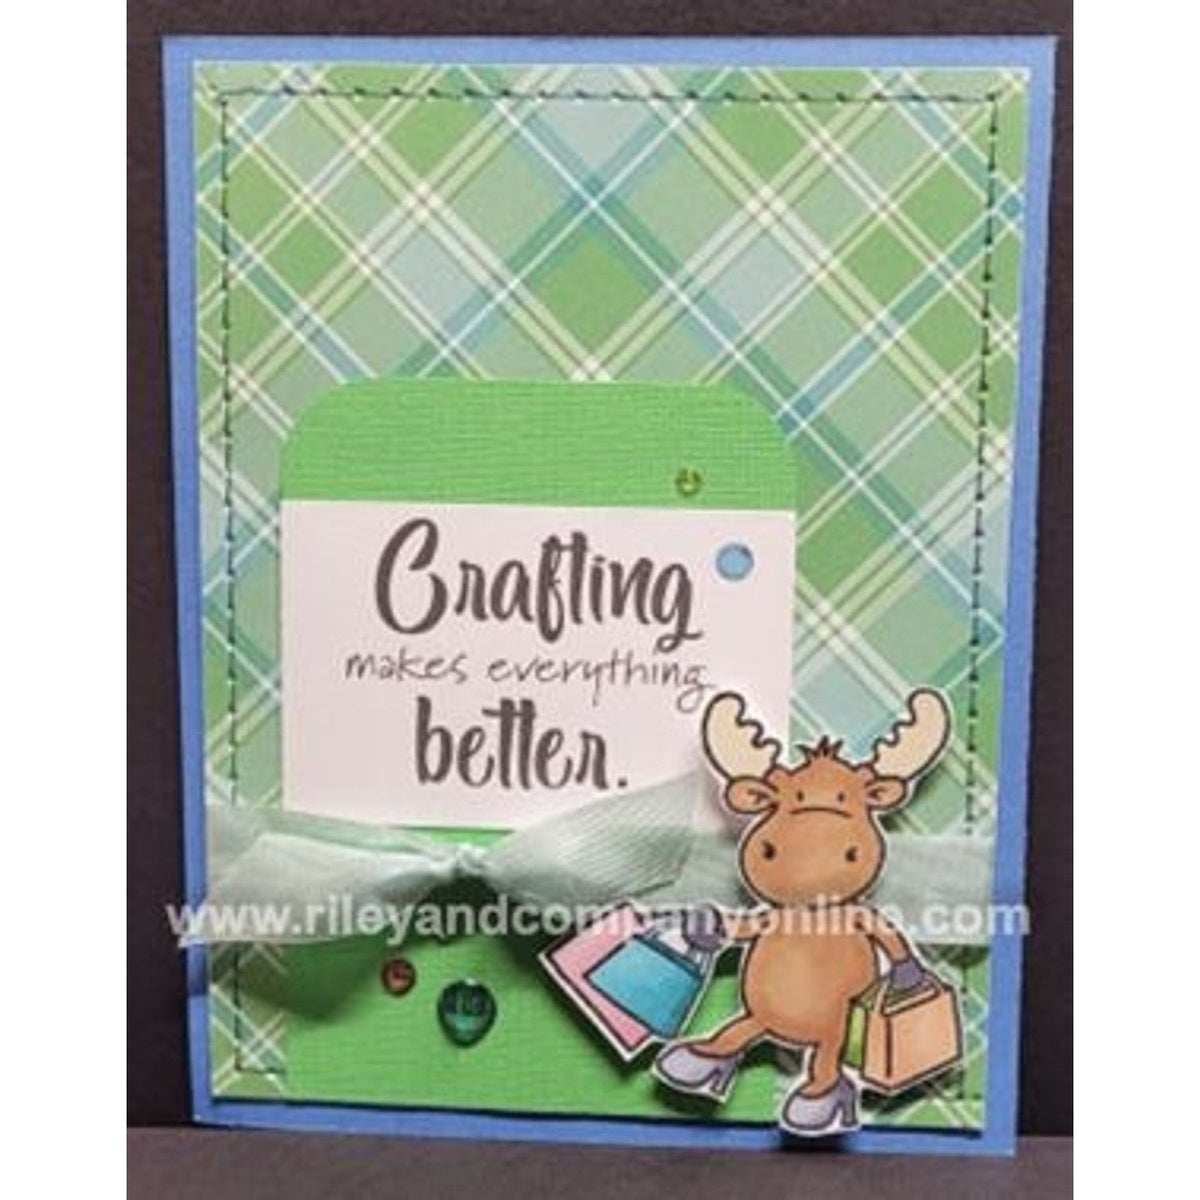 Crafting Makes Everything Better Cling Stamp by Riley &amp; Co